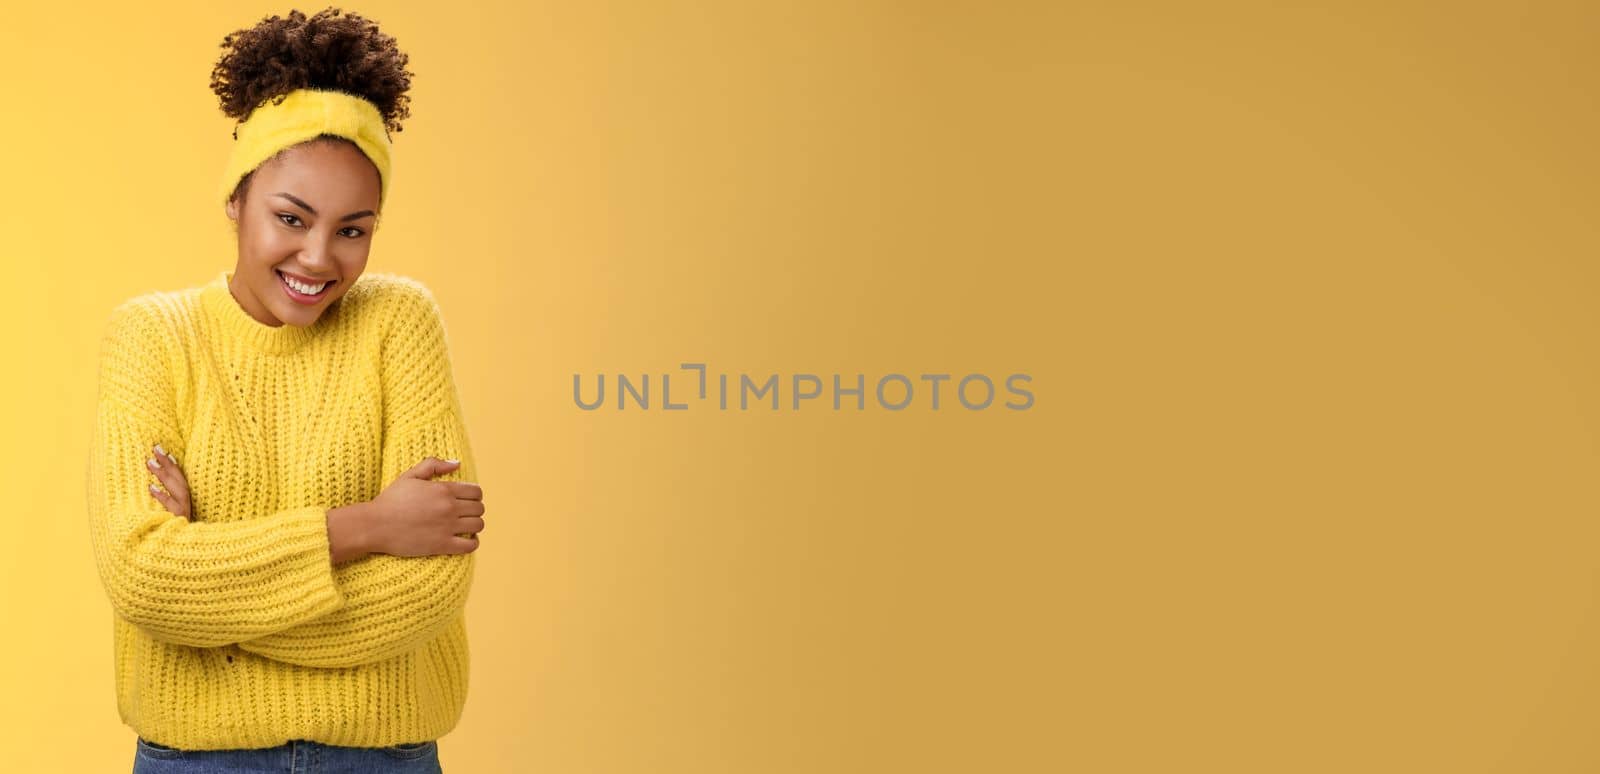 Tender delicate young african-american cheerful girlfriend curly hairstyle headband sweater hugging herself embracing gladly smiling camera feel soft comfortable, standing yellow background warm.